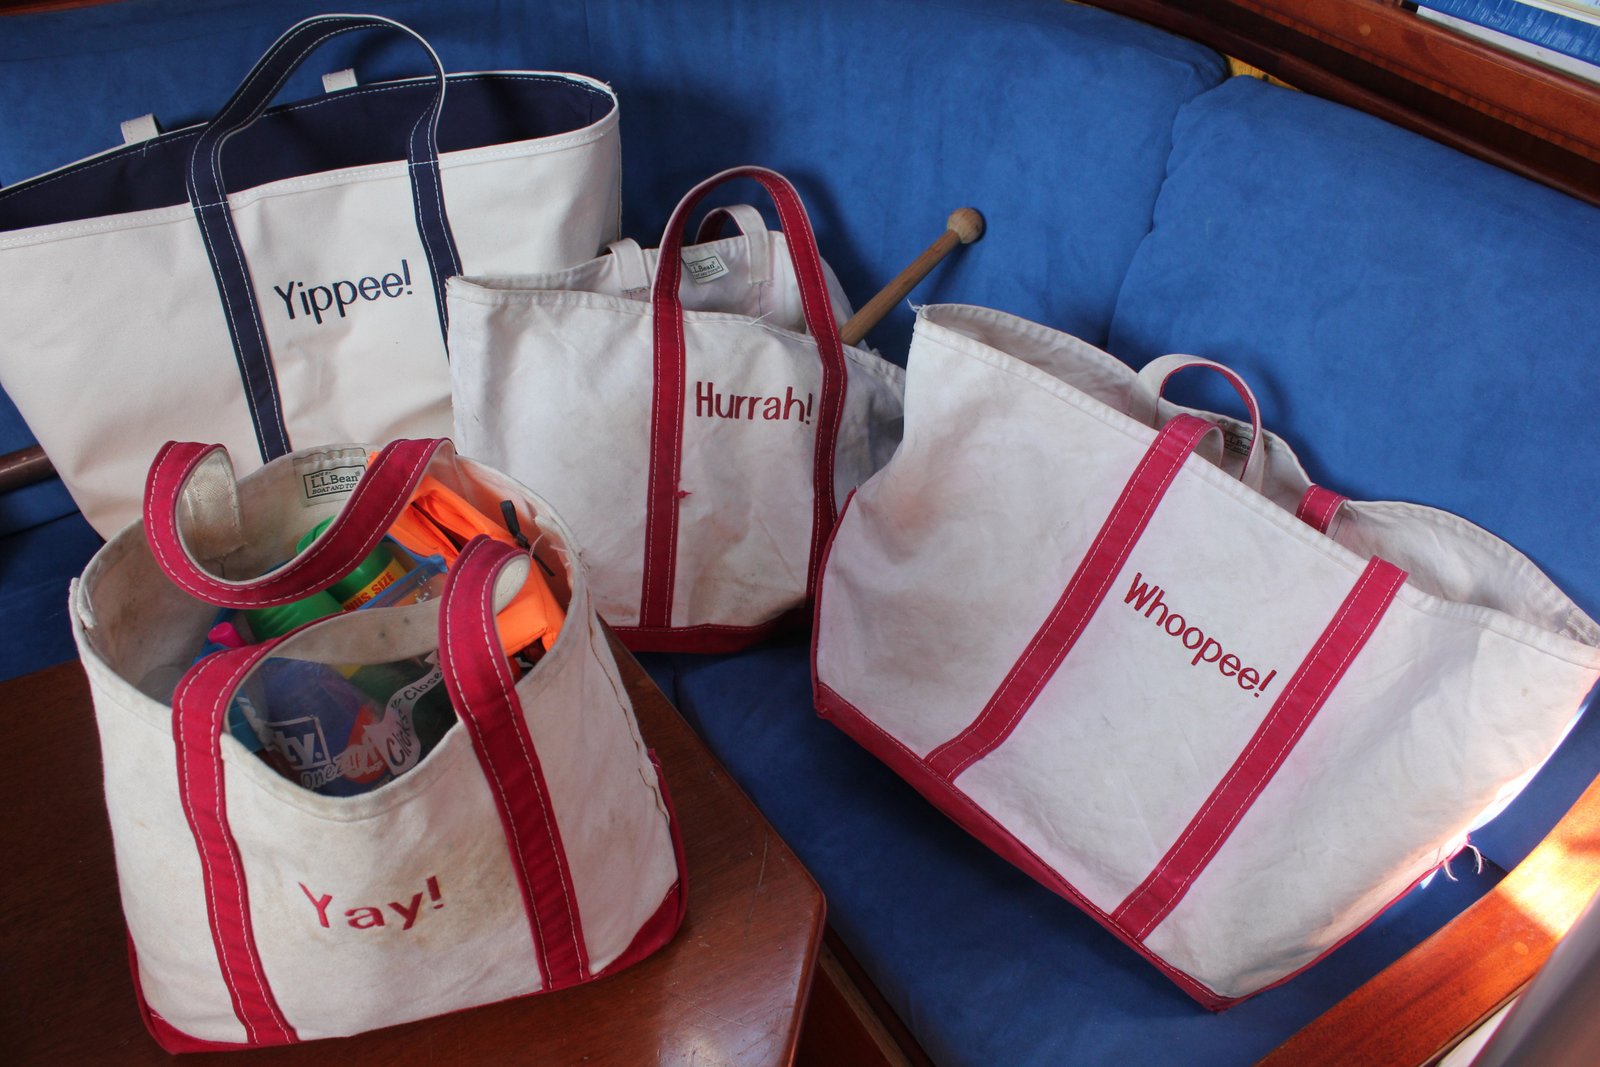 Salt Water New England: Canvas Boat Bags and The L.L. Bean Boat and Tote Bag